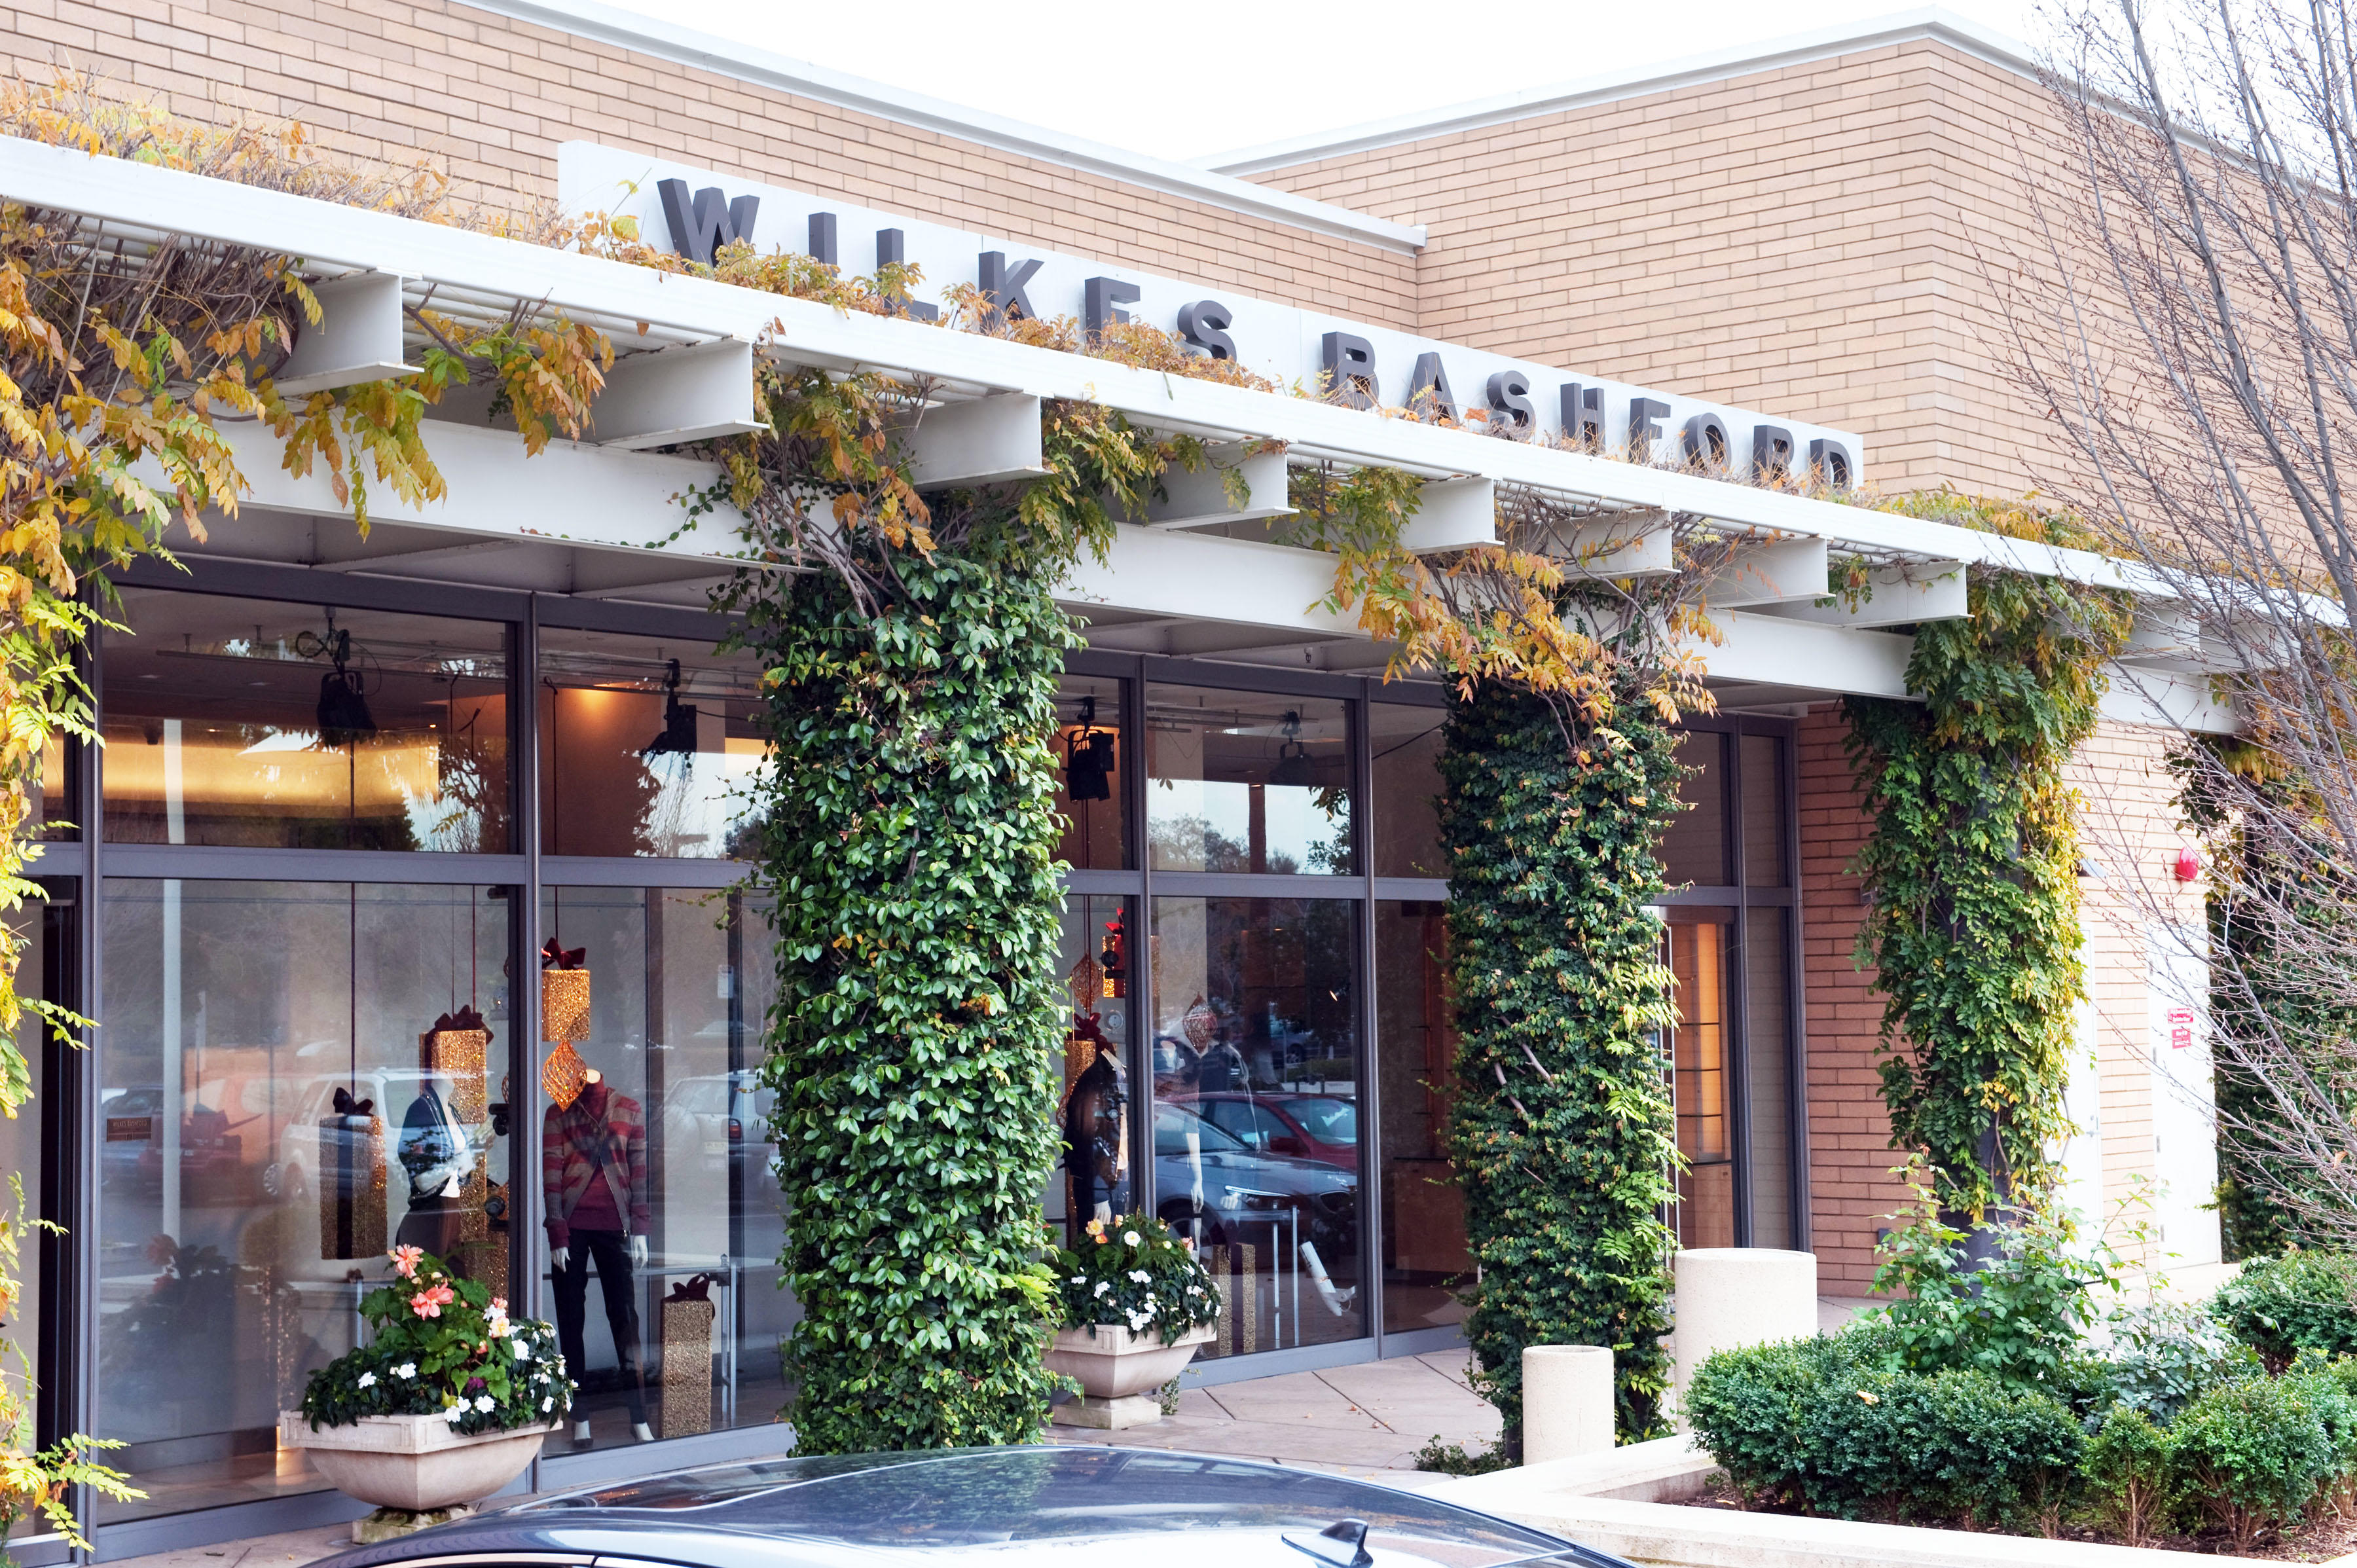 Welcome to Wilkes!
450 Stanford Shopping Center
Palo Alto, California